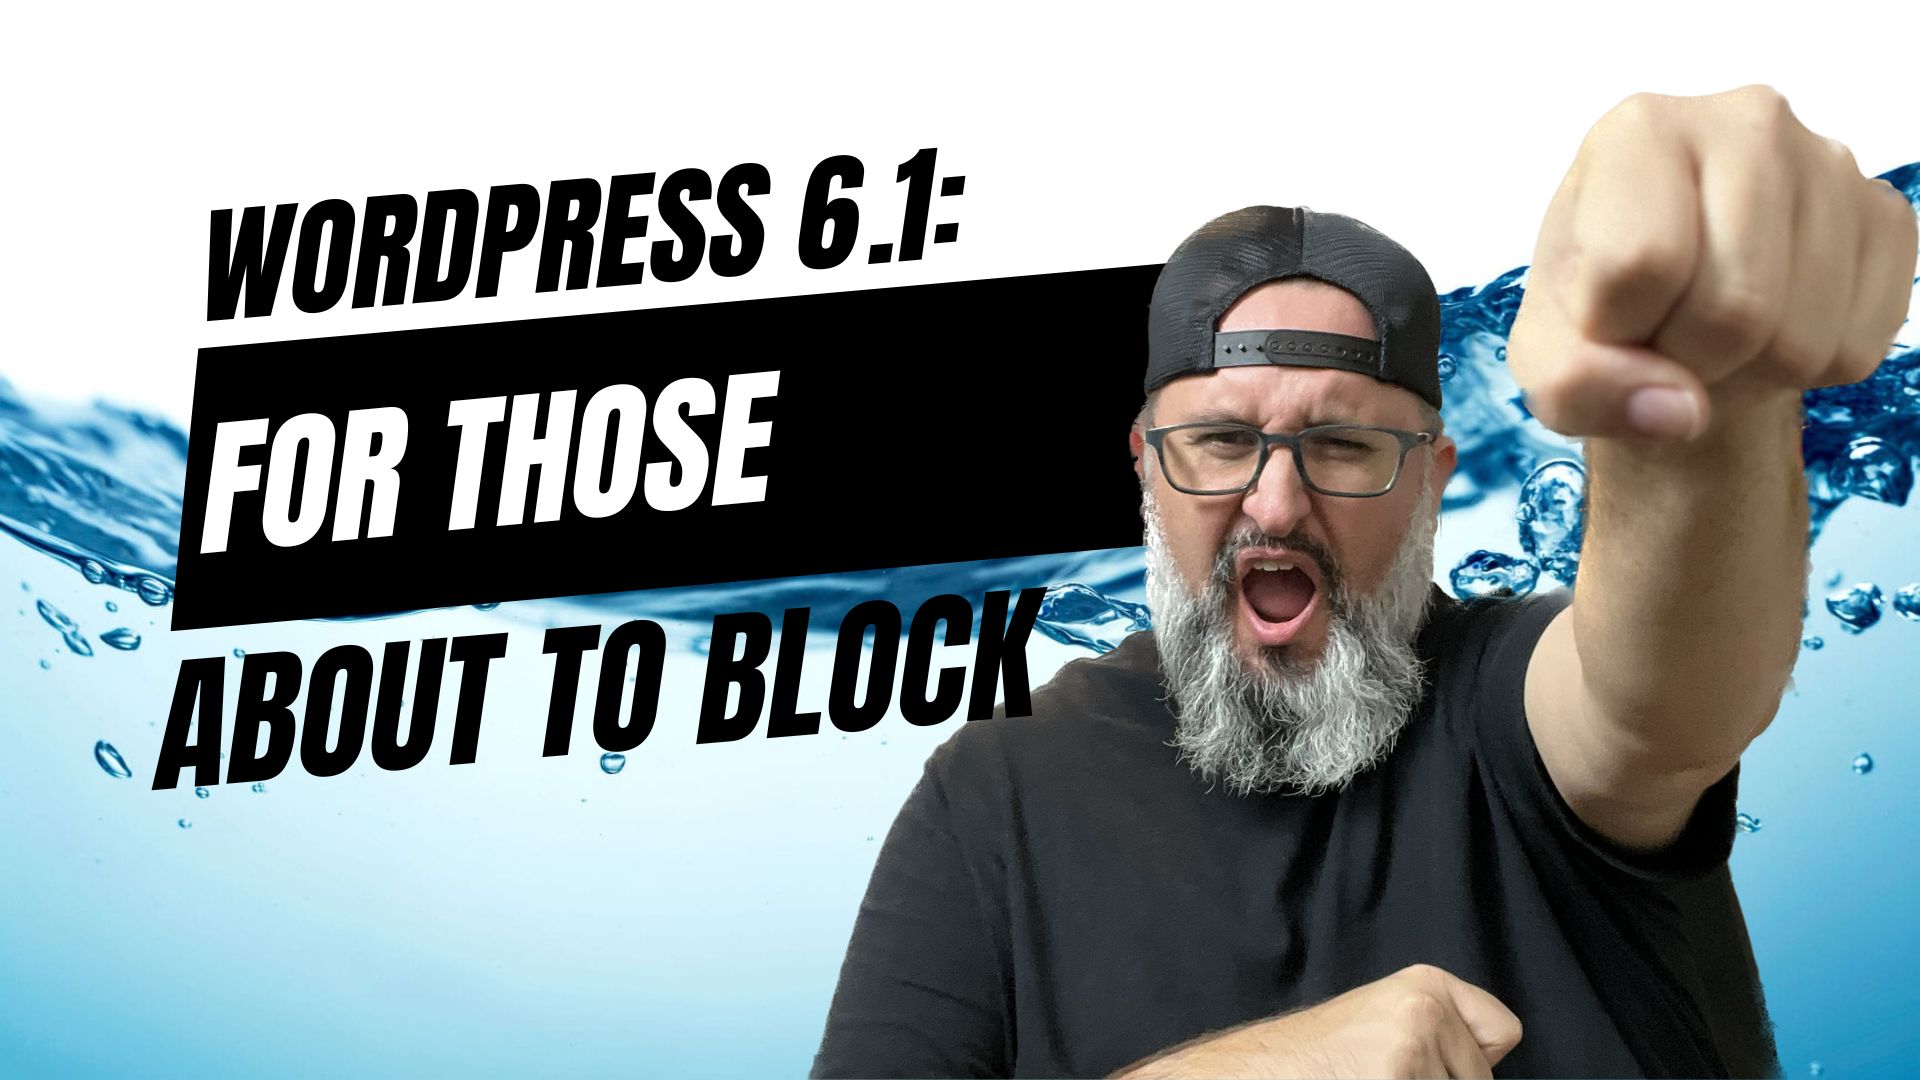 EP433 - WordPress 6.1: For Those About to Block